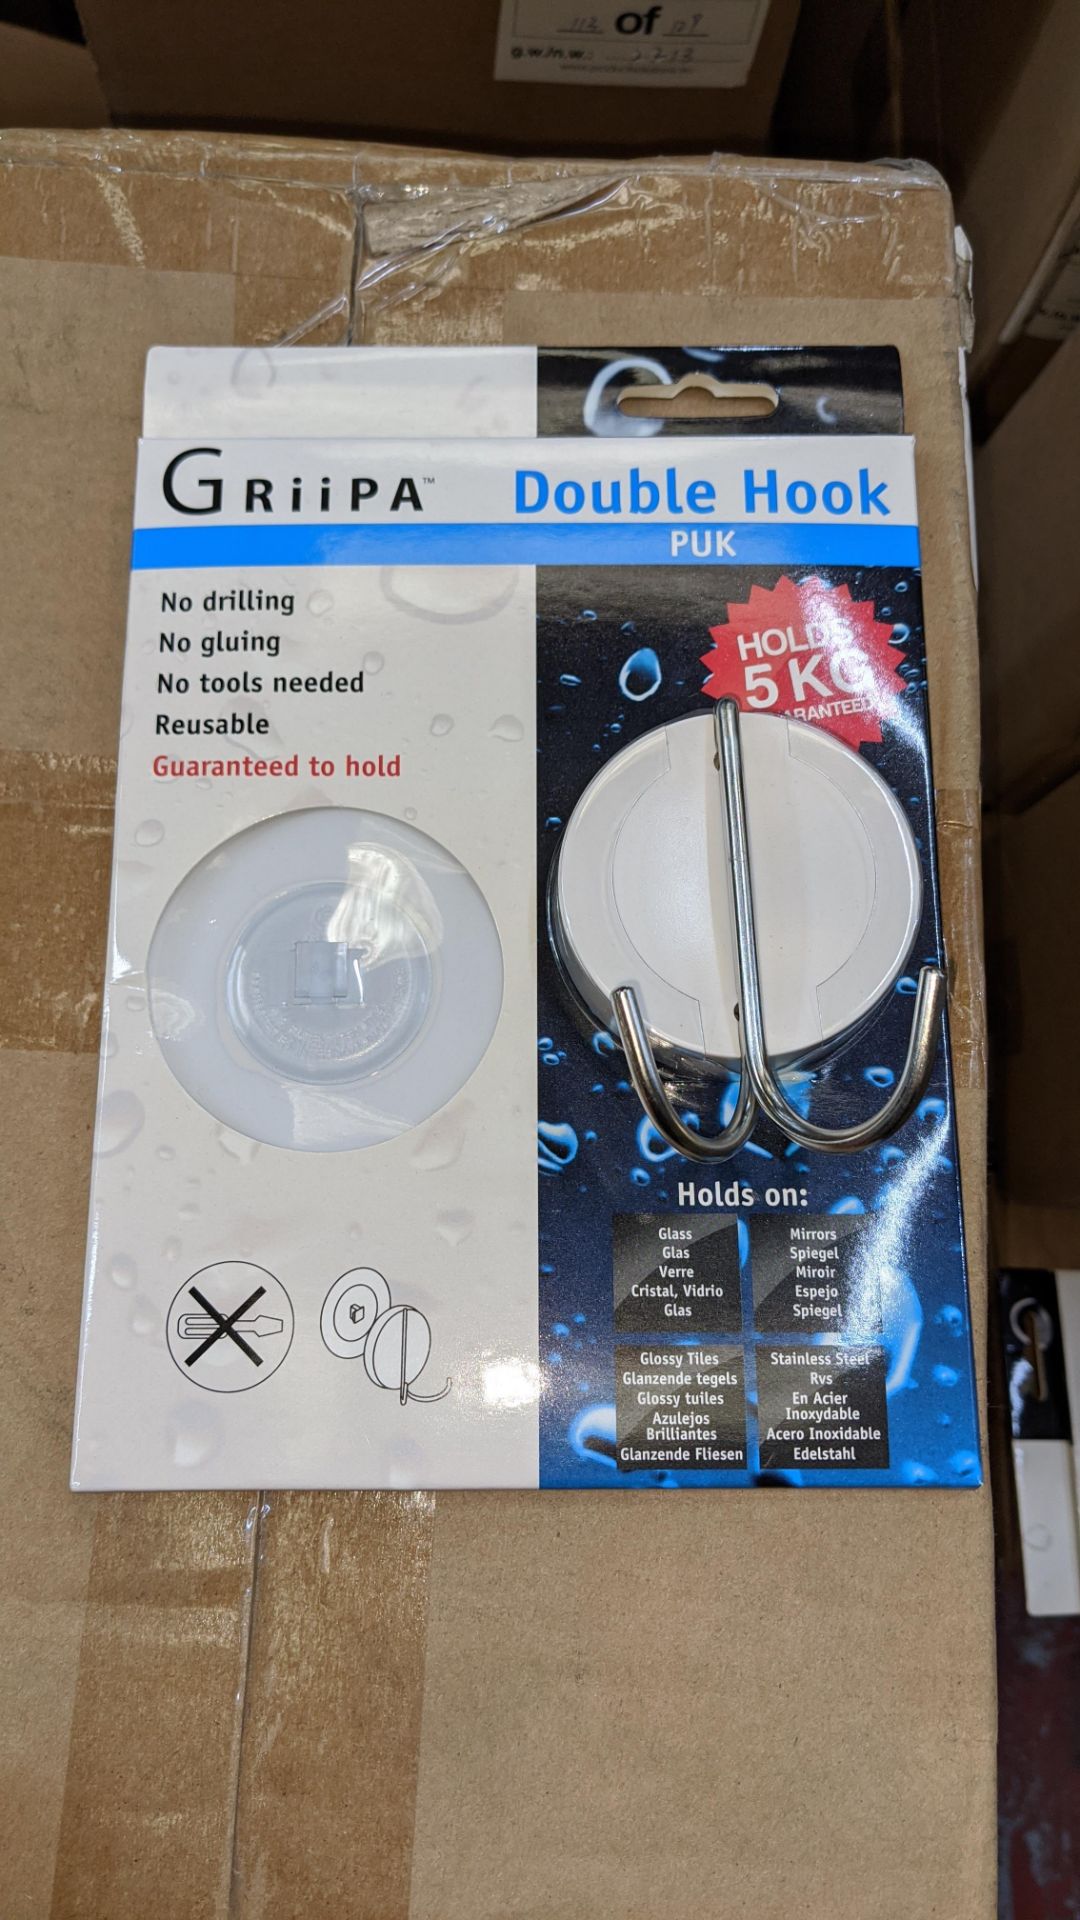 36 off Griipa Puk double hooks. Suction operated with 5kg capacity, each double hook is individuall